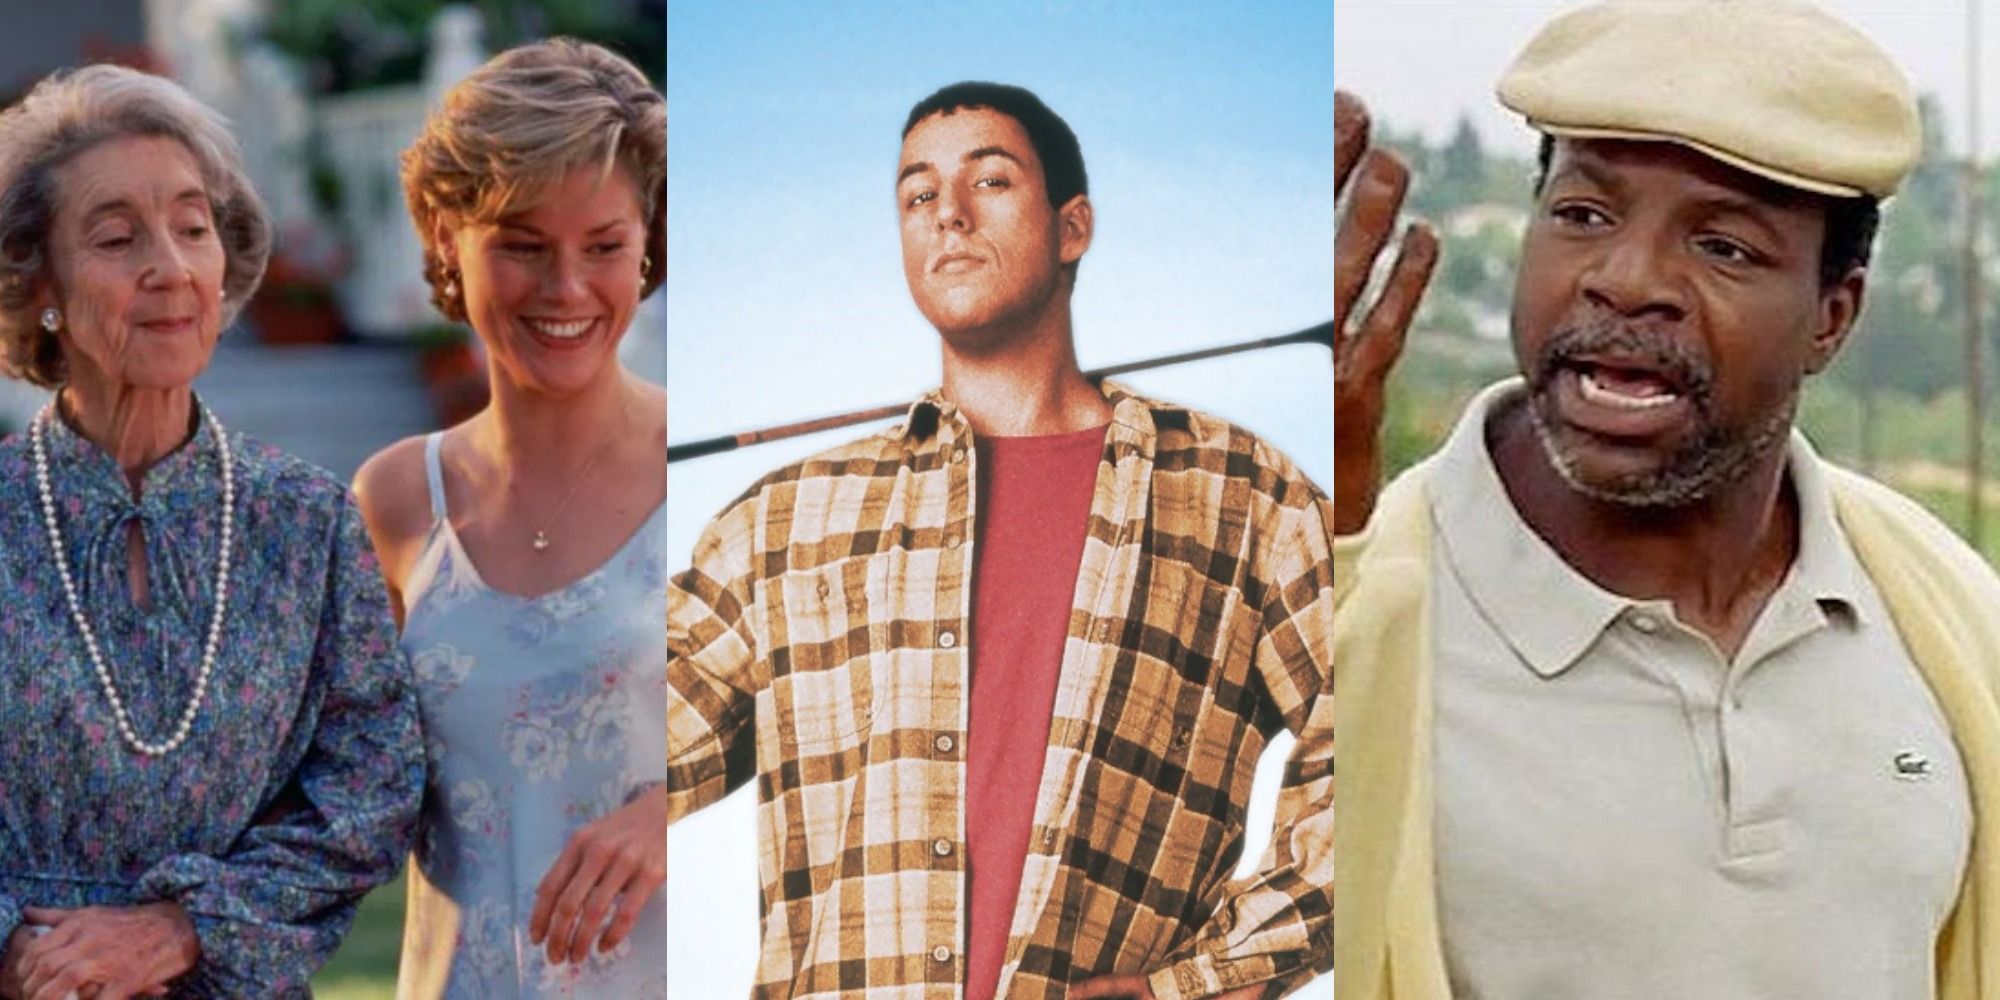 Happy Gilmore The 10 Best Characters, Ranked ScreenRant